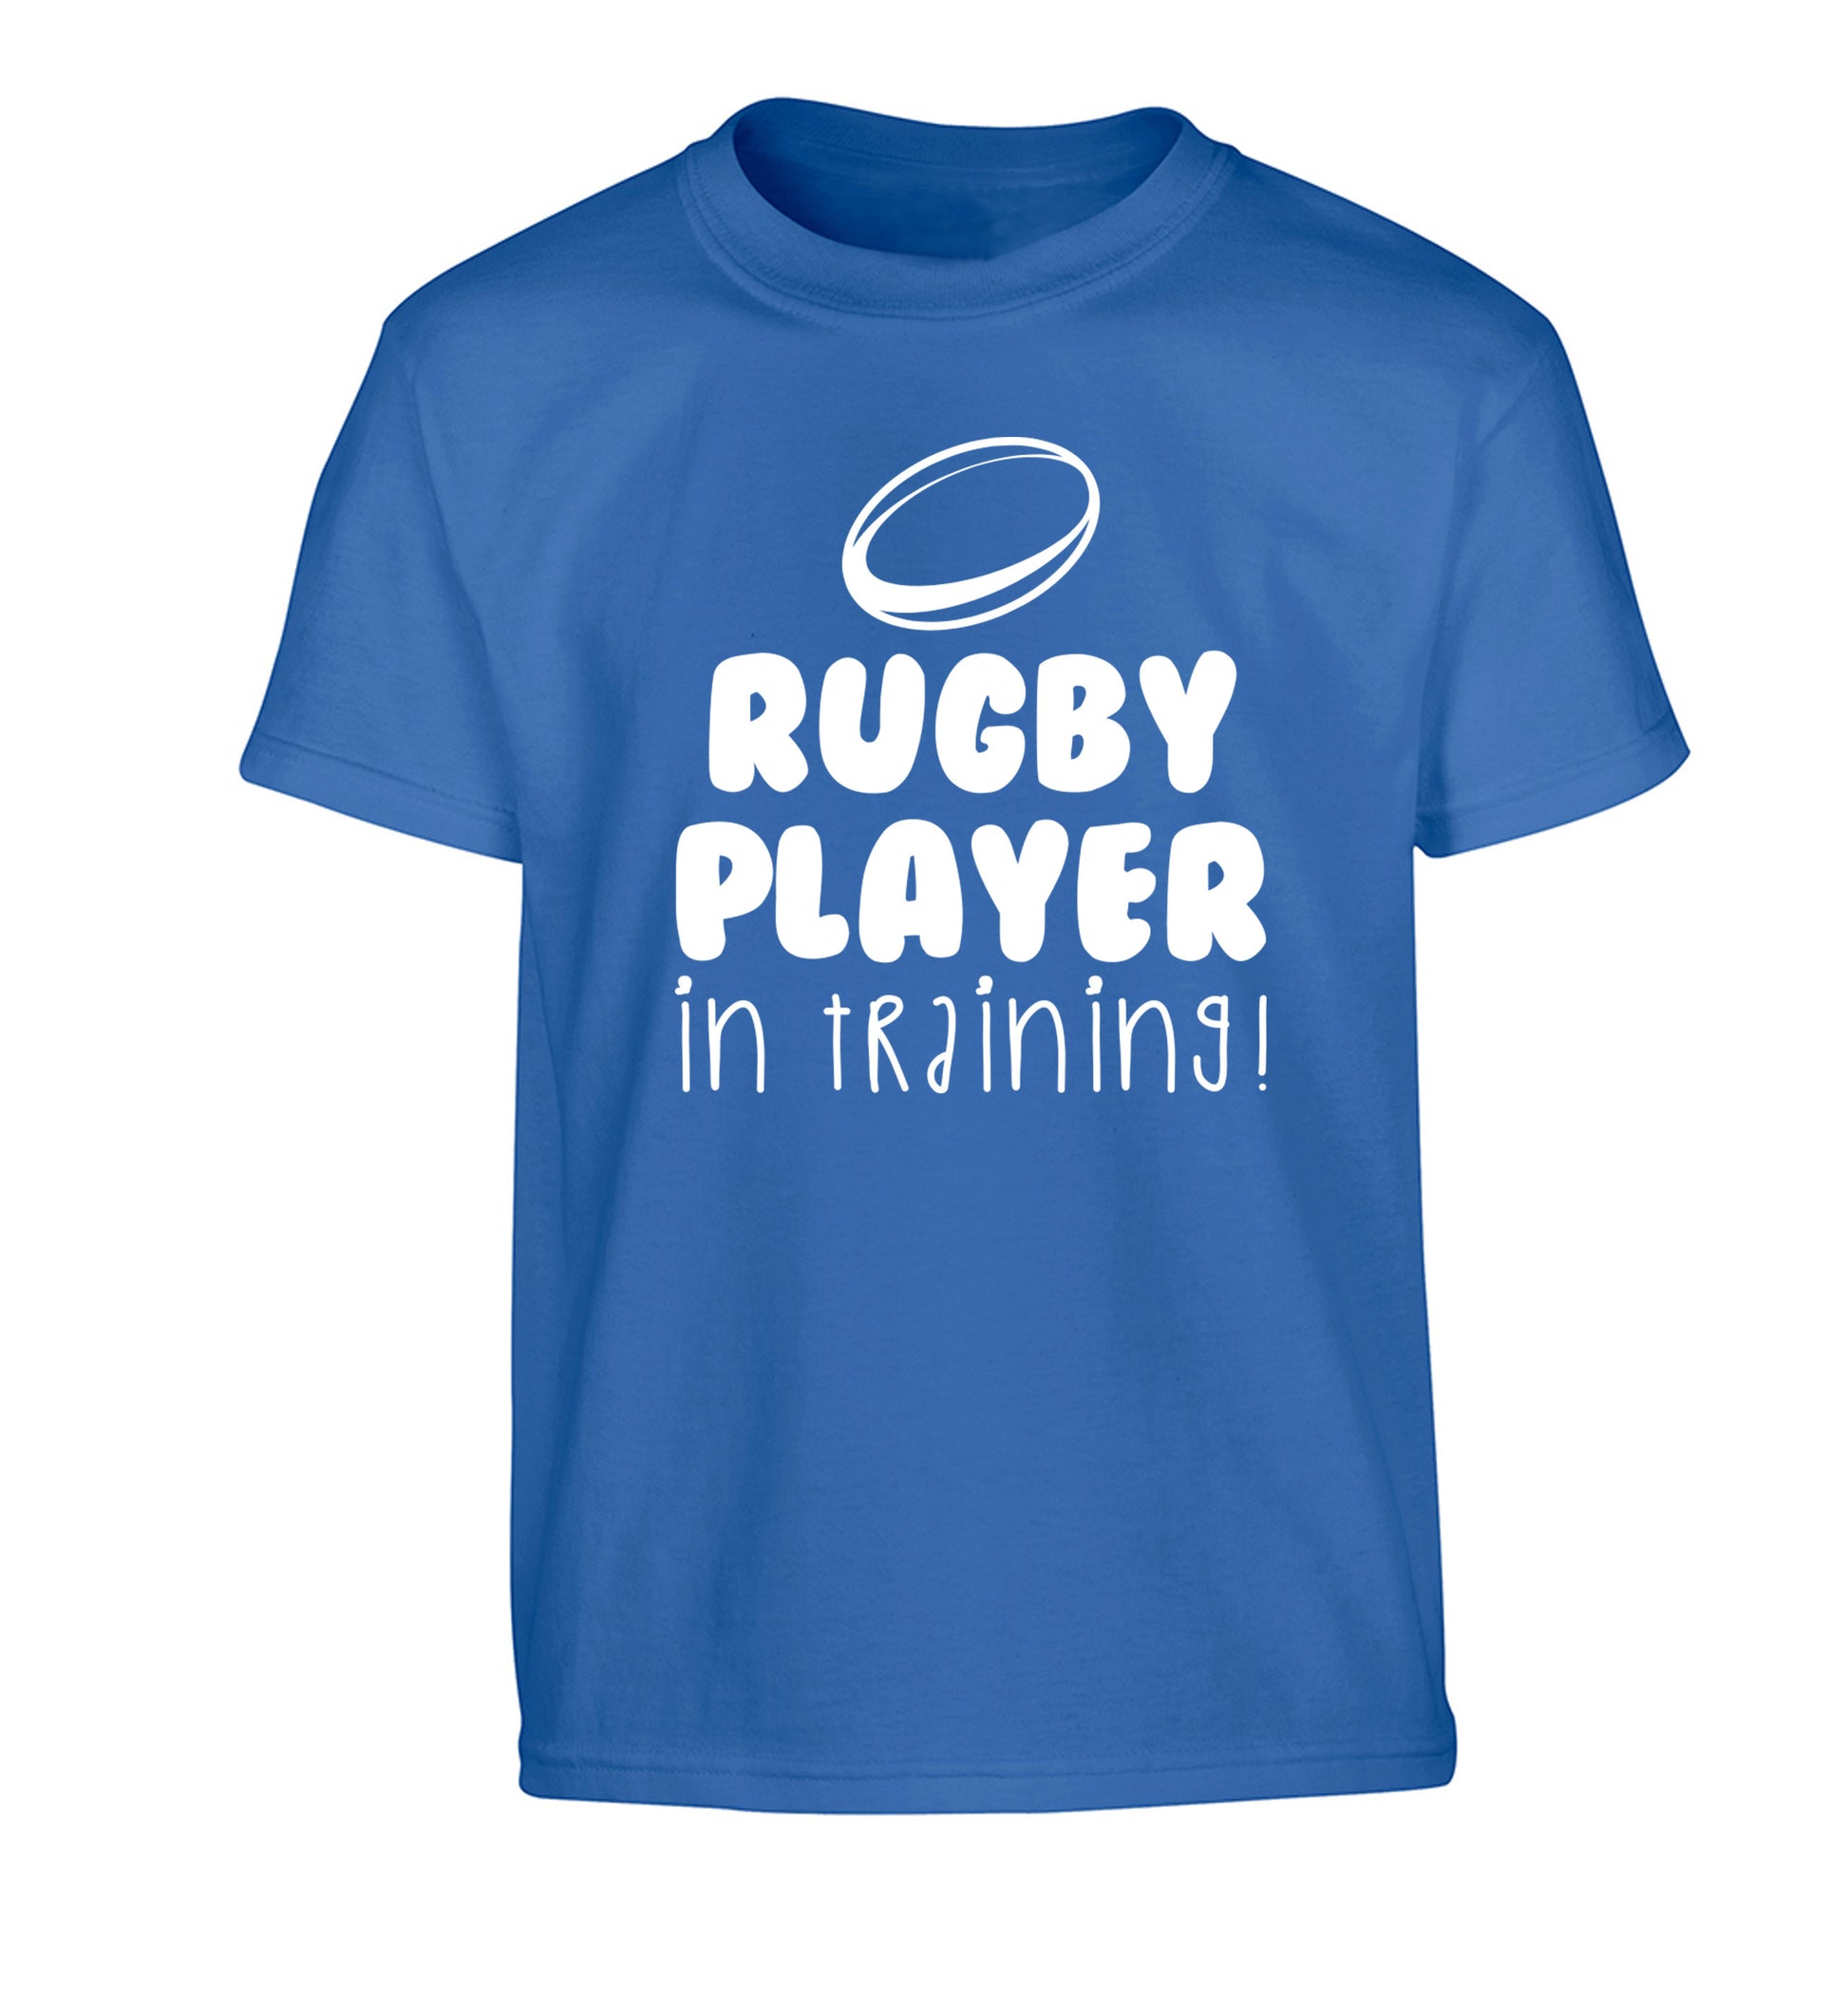 Rugby player in training Children's blue Tshirt 12-14 Years